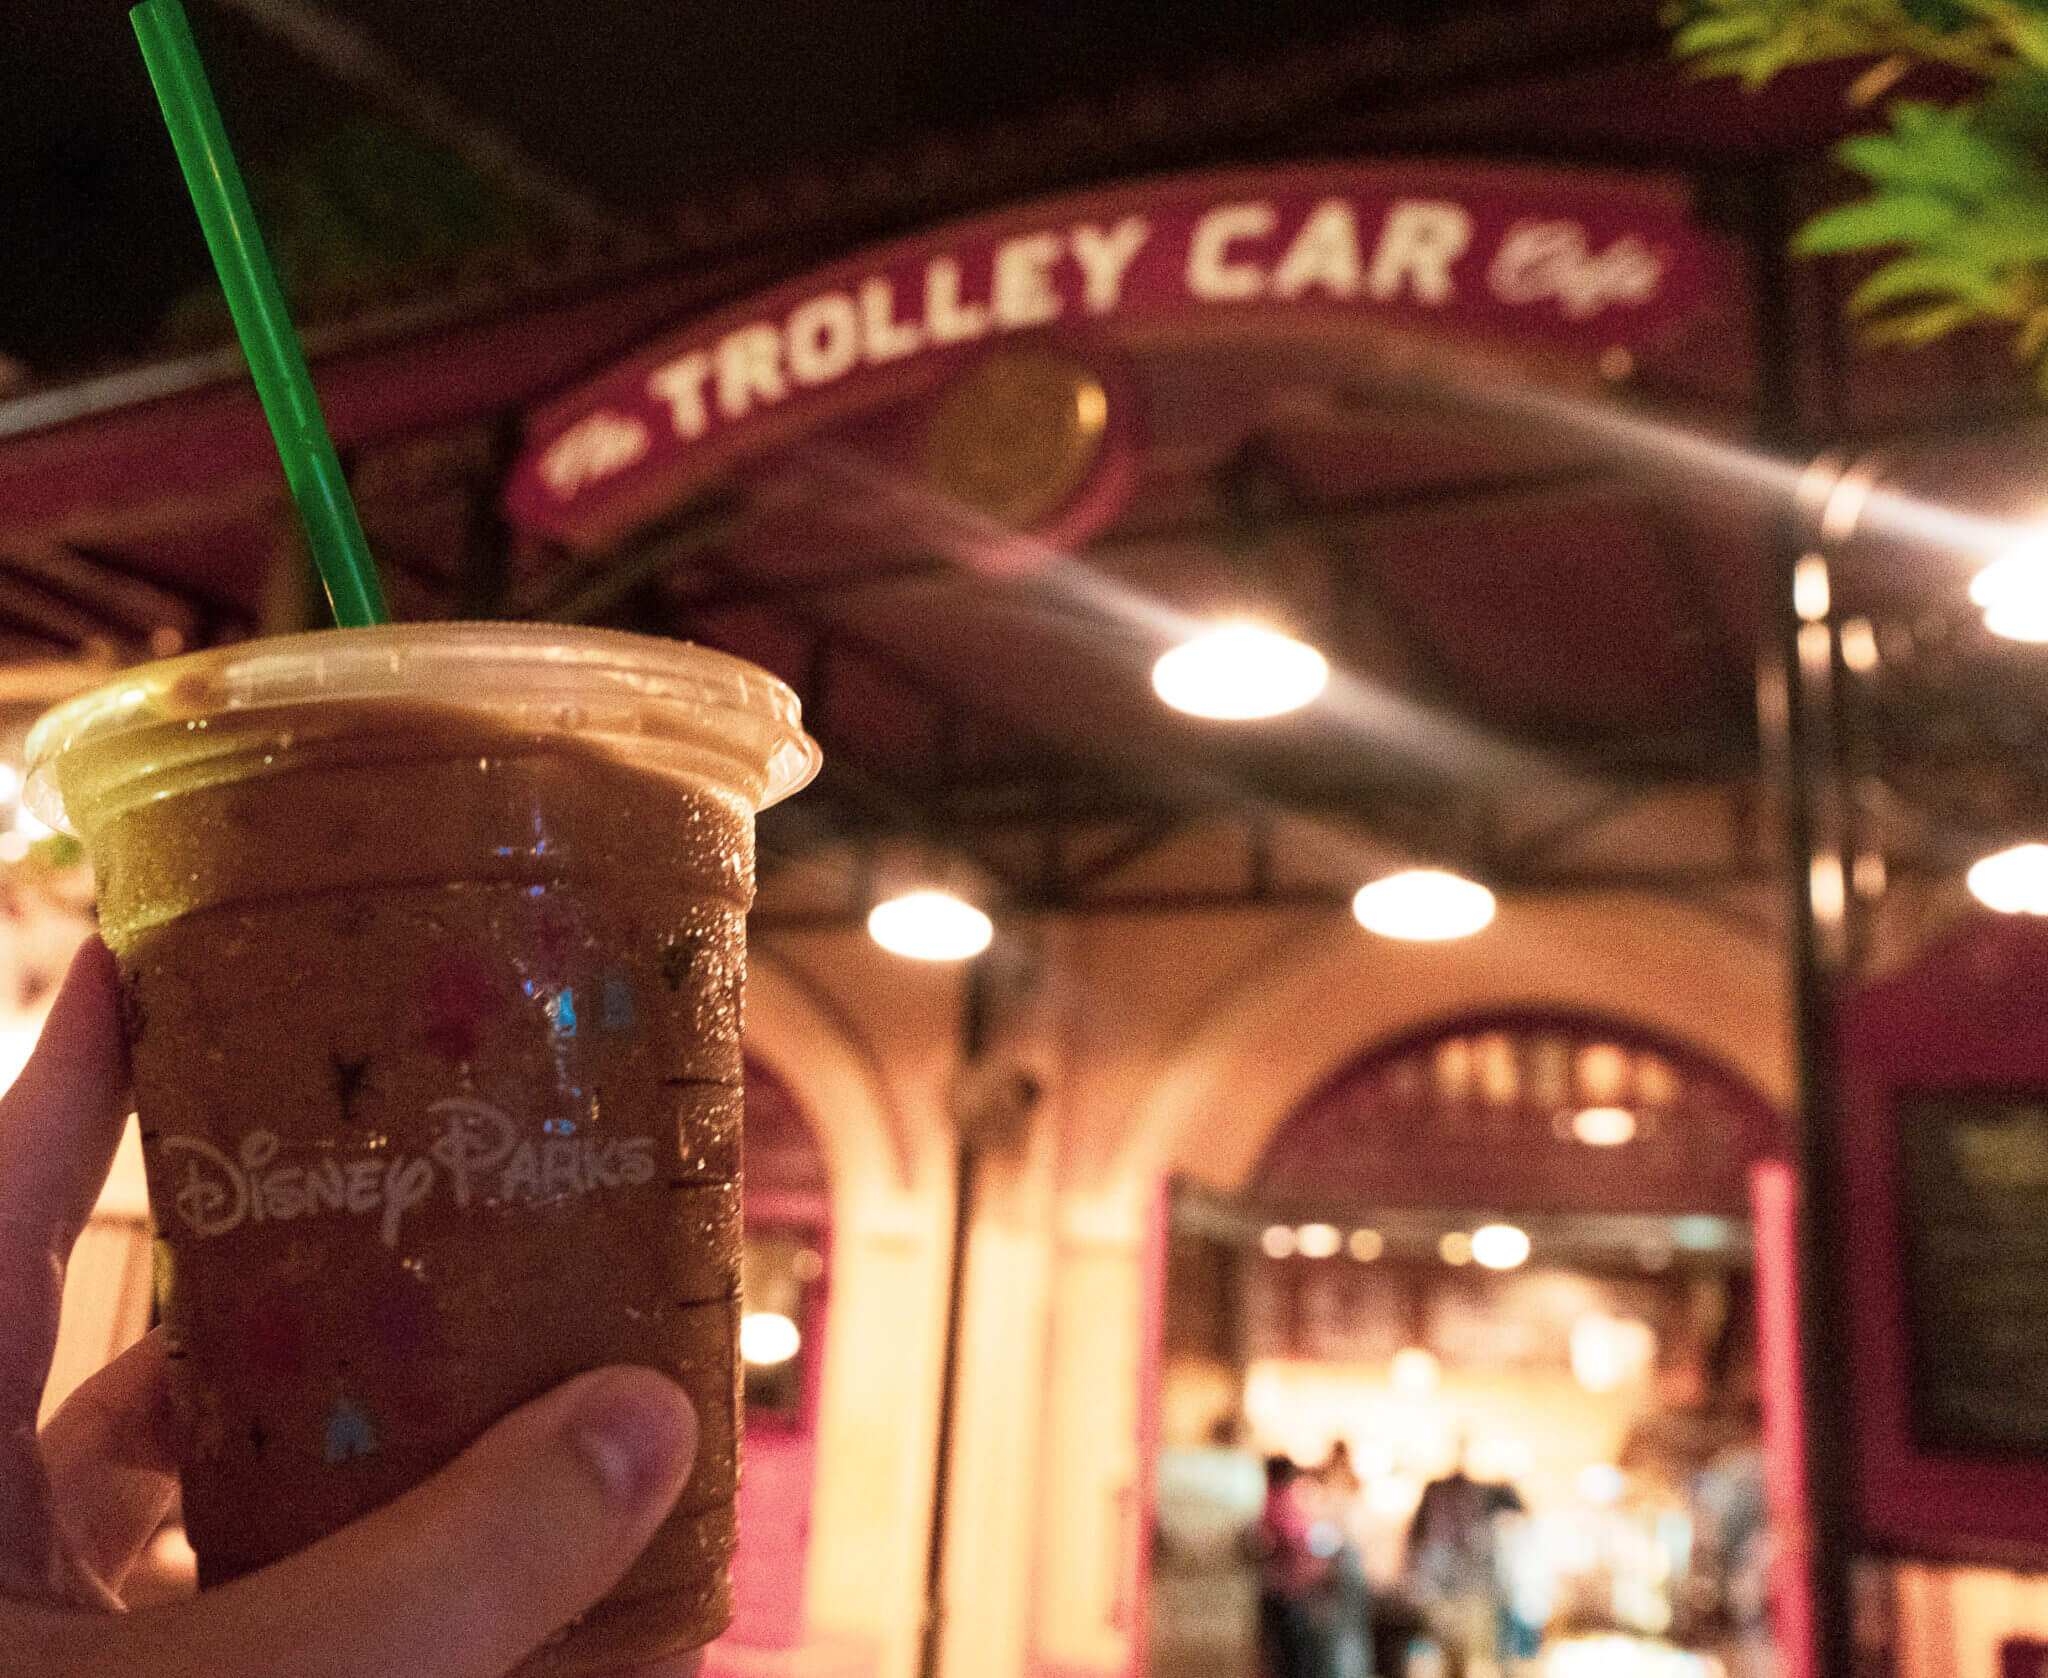 Iced latte coffee from Trolley Car Cafe in Hollywood Studios at Disney World